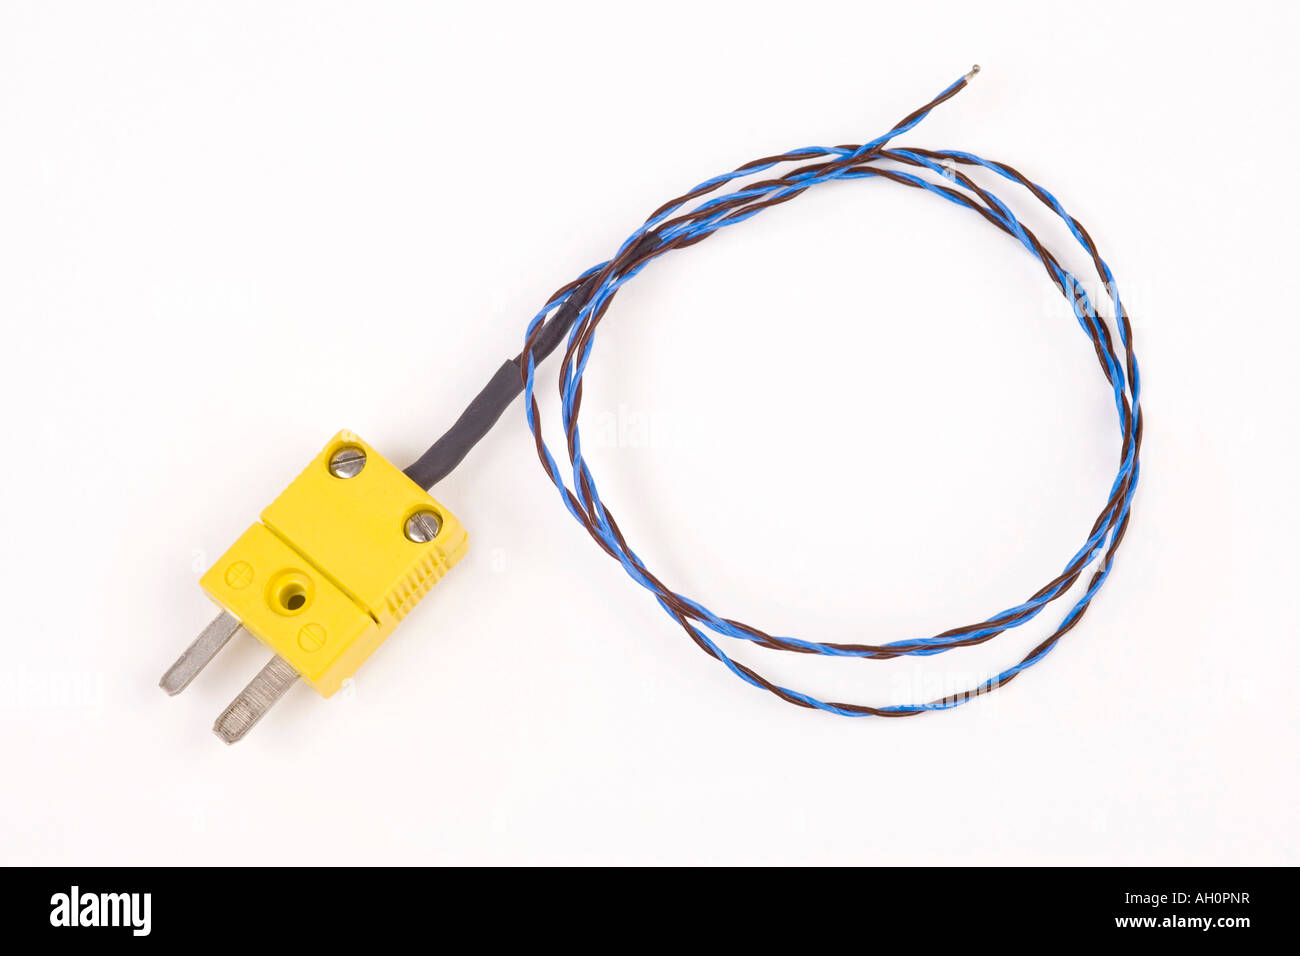 K type thermocouple junction temperature sensor and connector Stock Photo